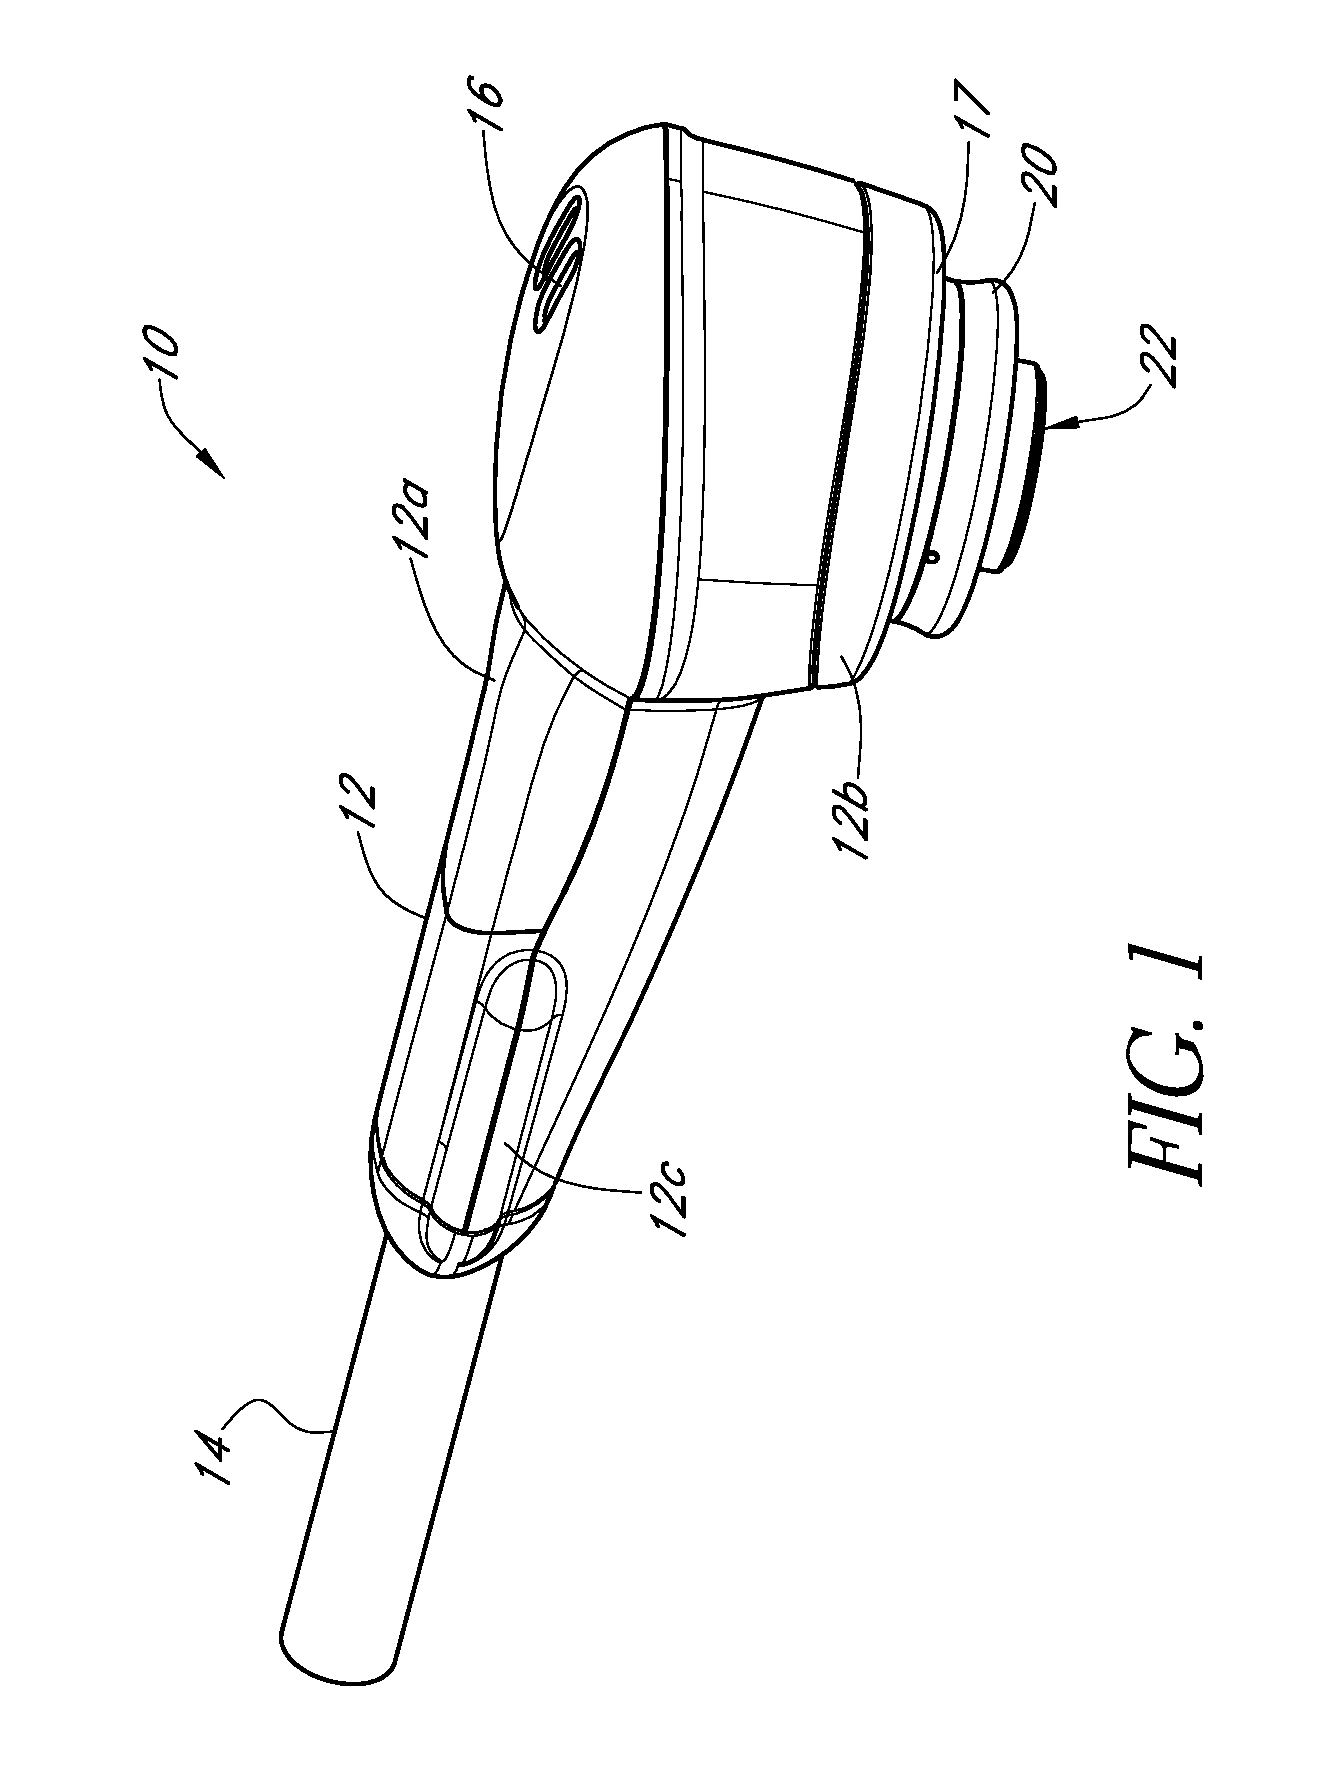 Apparatus and method for indicating treatment site locations for phototherapy to the brain